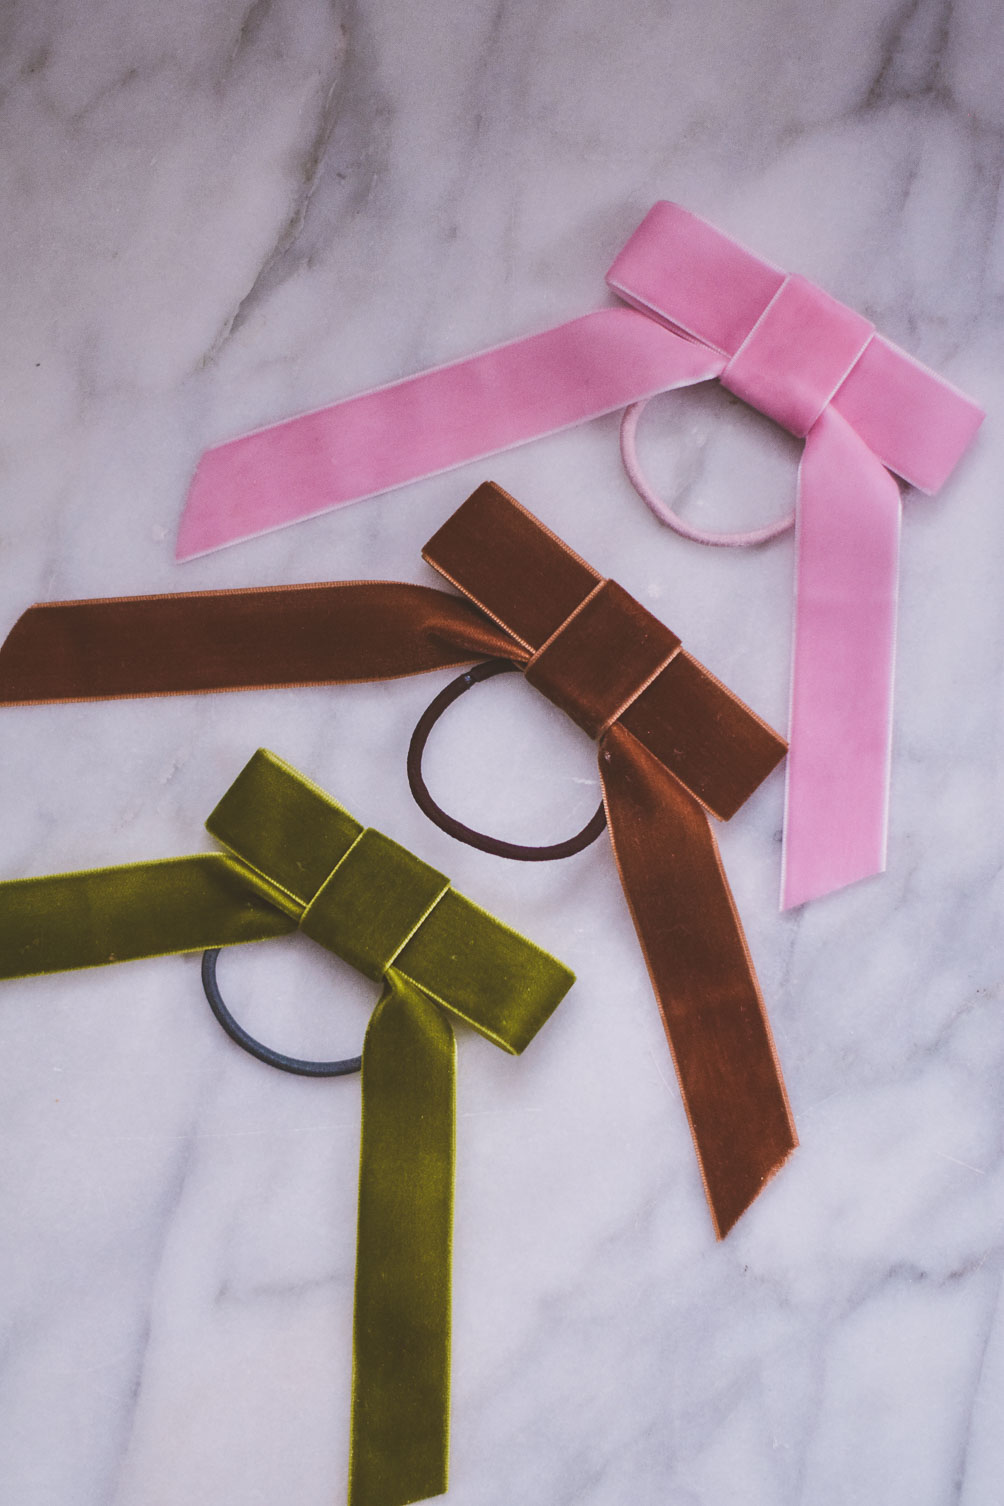 sharing a quick and easy tutorial for this diy velvet hair tie in assorted colors